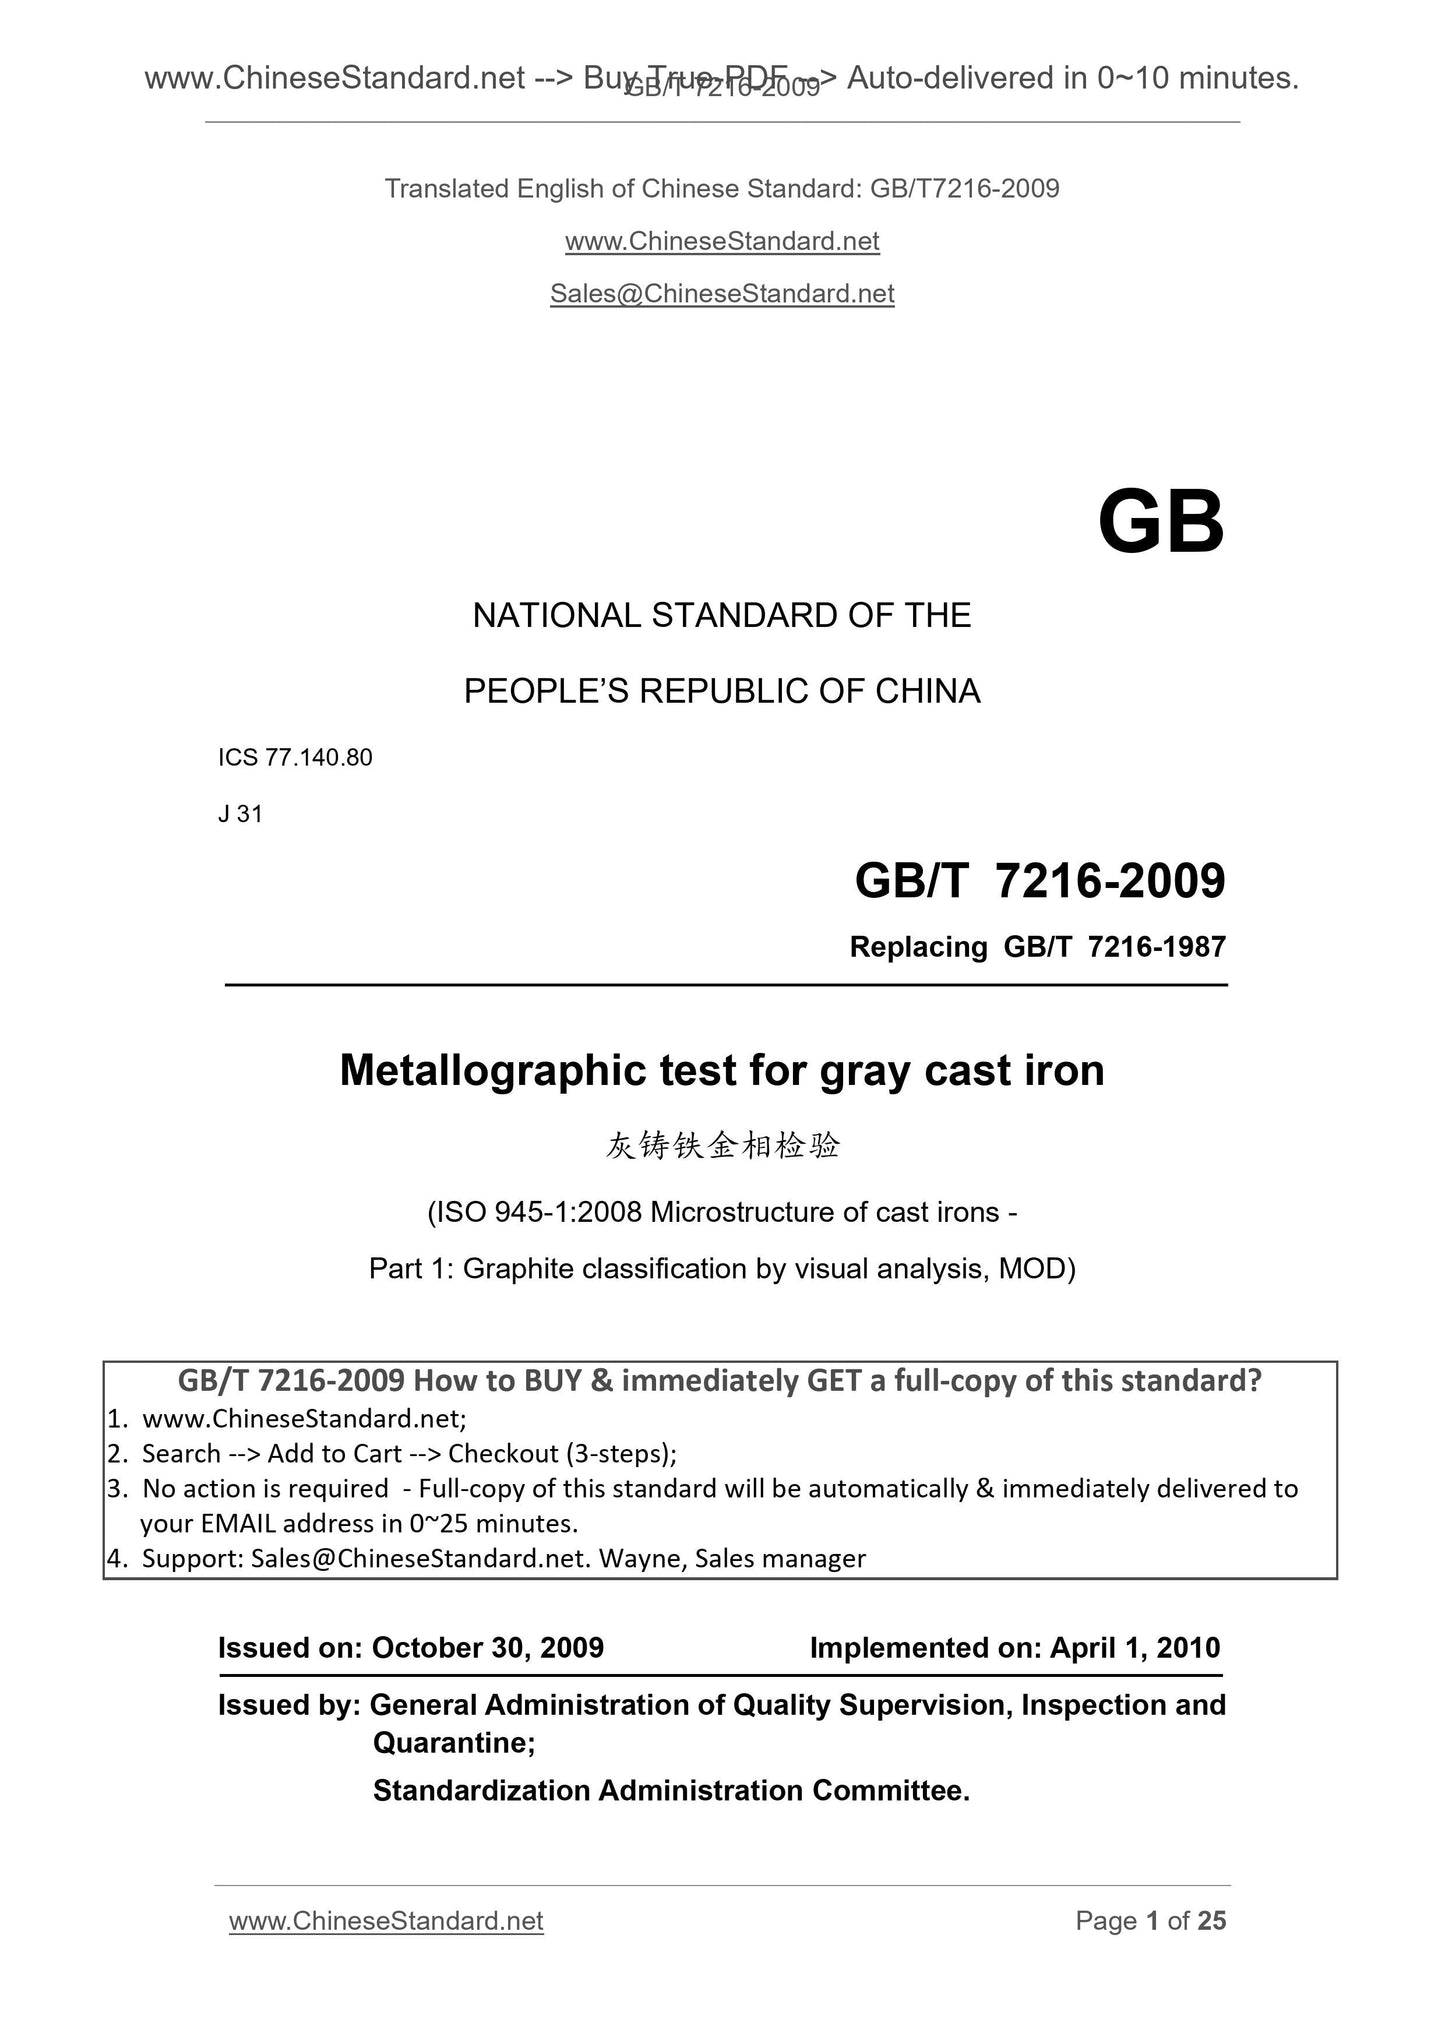 GB/T 7216-2009 Page 1